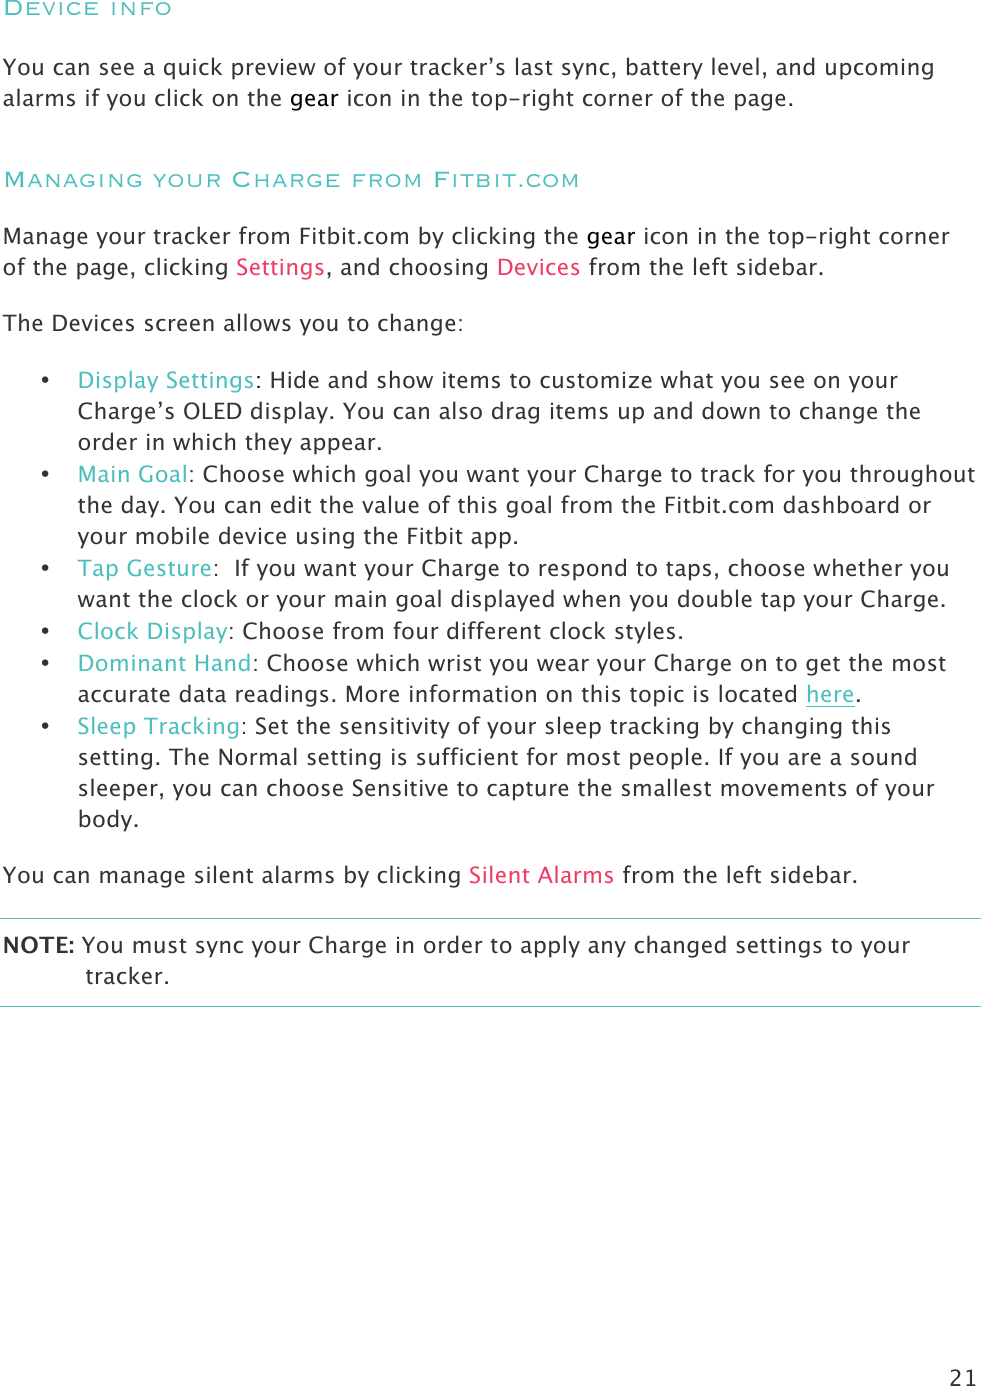 21  Device info  You can see a quick preview of your tracker’s last sync, battery level, and upcoming alarms if you click on the gear icon in the top-right corner of the page. Managing your Charge from Fitbit.com Manage your tracker from Fitbit.com by clicking the gear icon in the top-right corner of the page, clicking Settings, and choosing Devices from the left sidebar.  The Devices screen allows you to change:  • Display Settings: Hide and show items to customize what you see on your Charge’s OLED display. You can also drag items up and down to change the order in which they appear.  • Main Goal: Choose which goal you want your Charge to track for you throughout the day. You can edit the value of this goal from the Fitbit.com dashboard or your mobile device using the Fitbit app.  • Tap Gesture:  If you want your Charge to respond to taps, choose whether you want the clock or your main goal displayed when you double tap your Charge. • Clock Display: Choose from four different clock styles. • Dominant Hand: Choose which wrist you wear your Charge on to get the most accurate data readings. More information on this topic is located here. • Sleep Tracking: Set the sensitivity of your sleep tracking by changing this setting. The Normal setting is sufficient for most people. If you are a sound sleeper, you can choose Sensitive to capture the smallest movements of your body. You can manage silent alarms by clicking Silent Alarms from the left sidebar.  NOTE: You must sync your Charge in order to apply any changed settings to your tracker.  